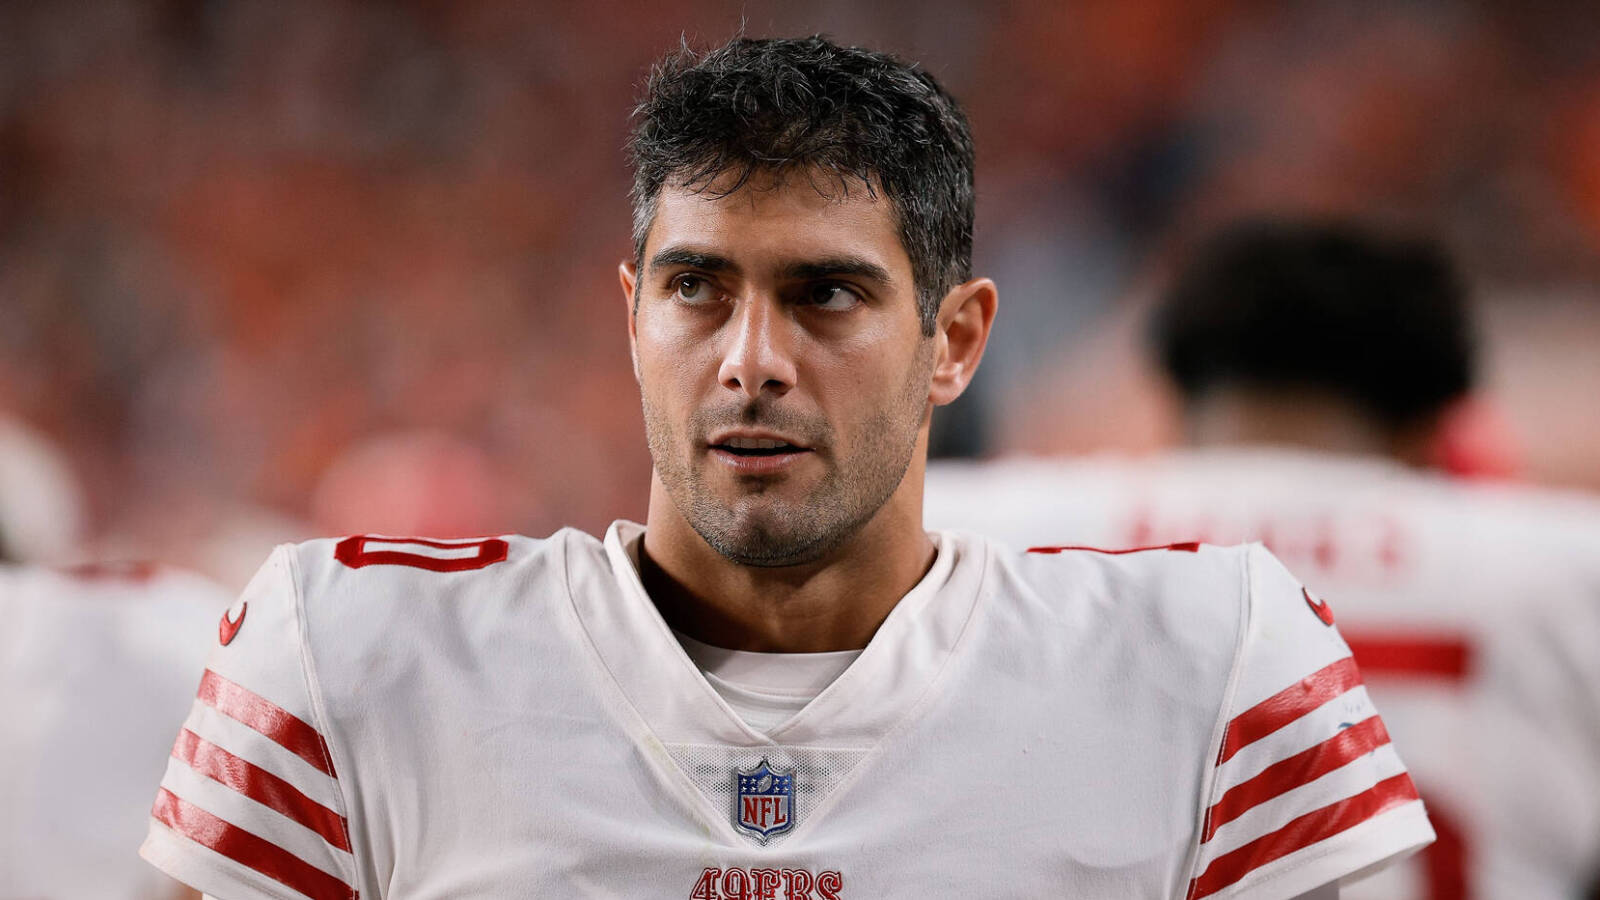 49ers' Jimmy Garoppolo 'not completely healthy' after offseason surgery